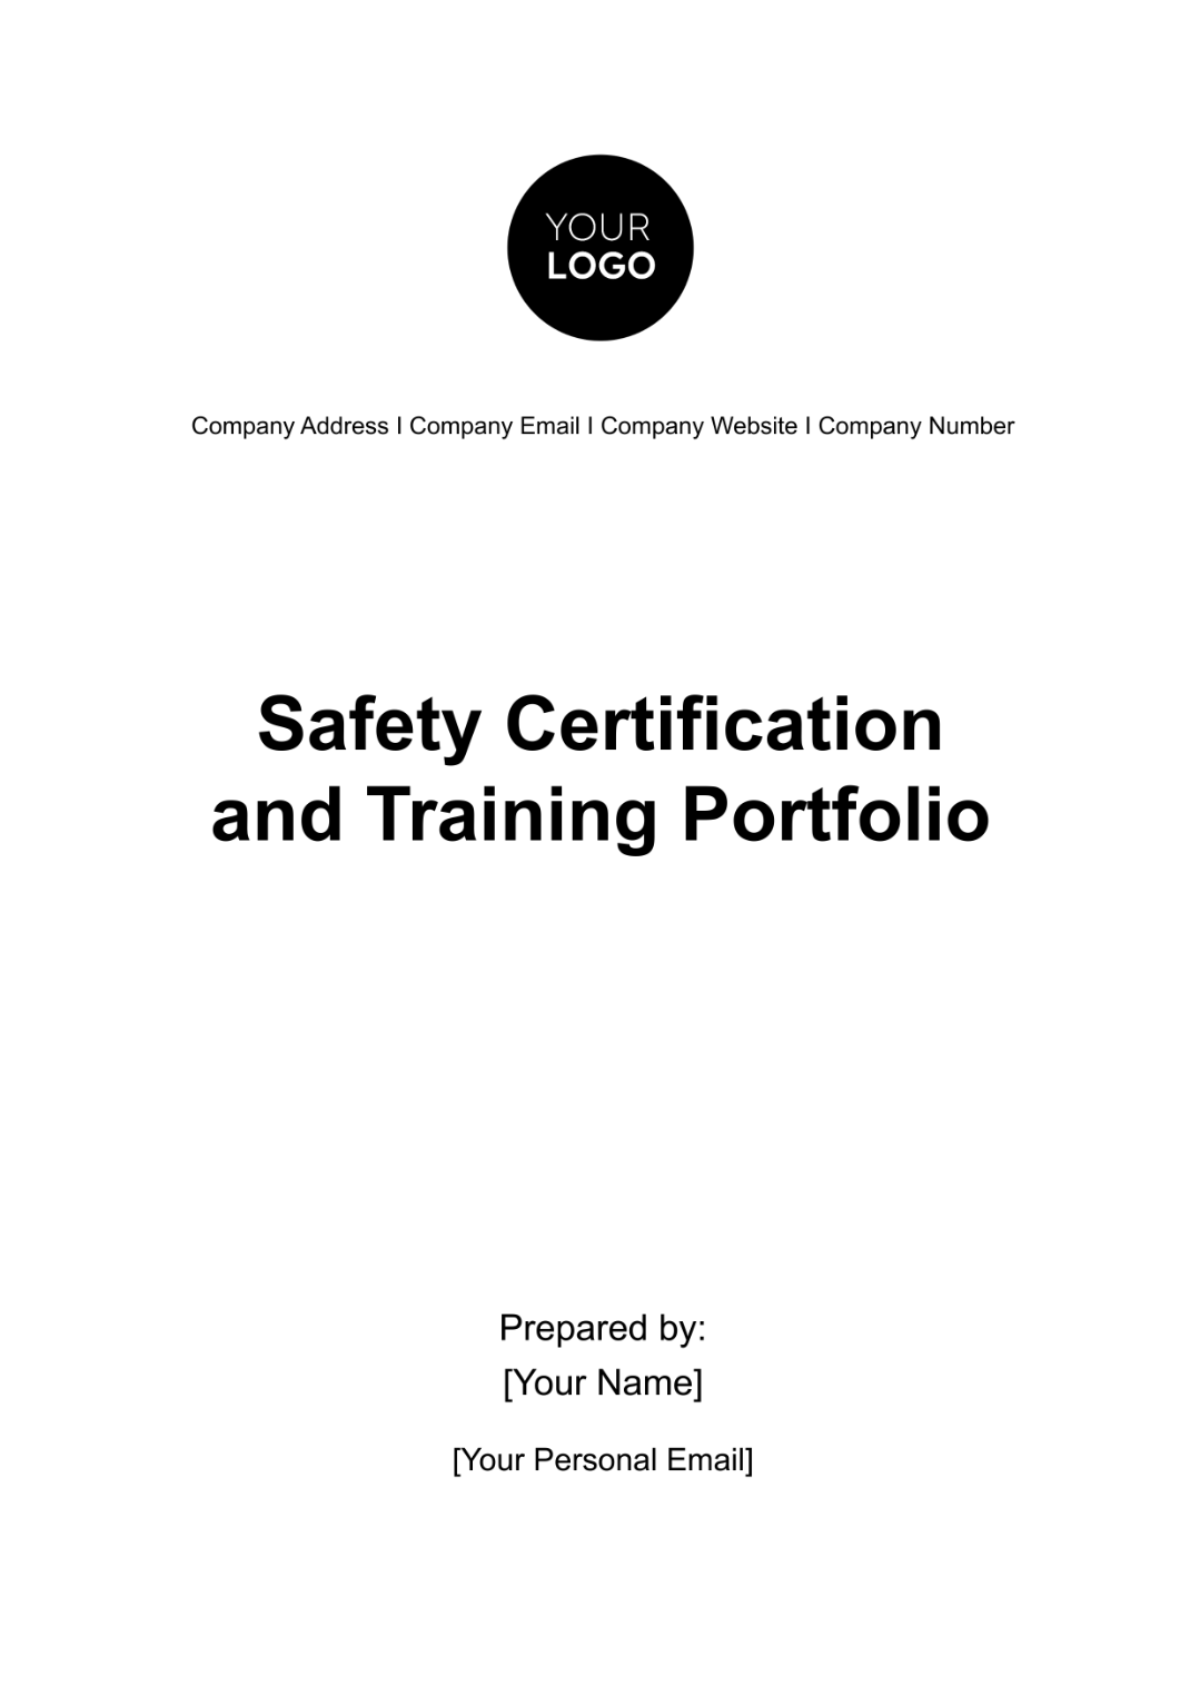 Free Safety Certification and Training Portfolio HR Template